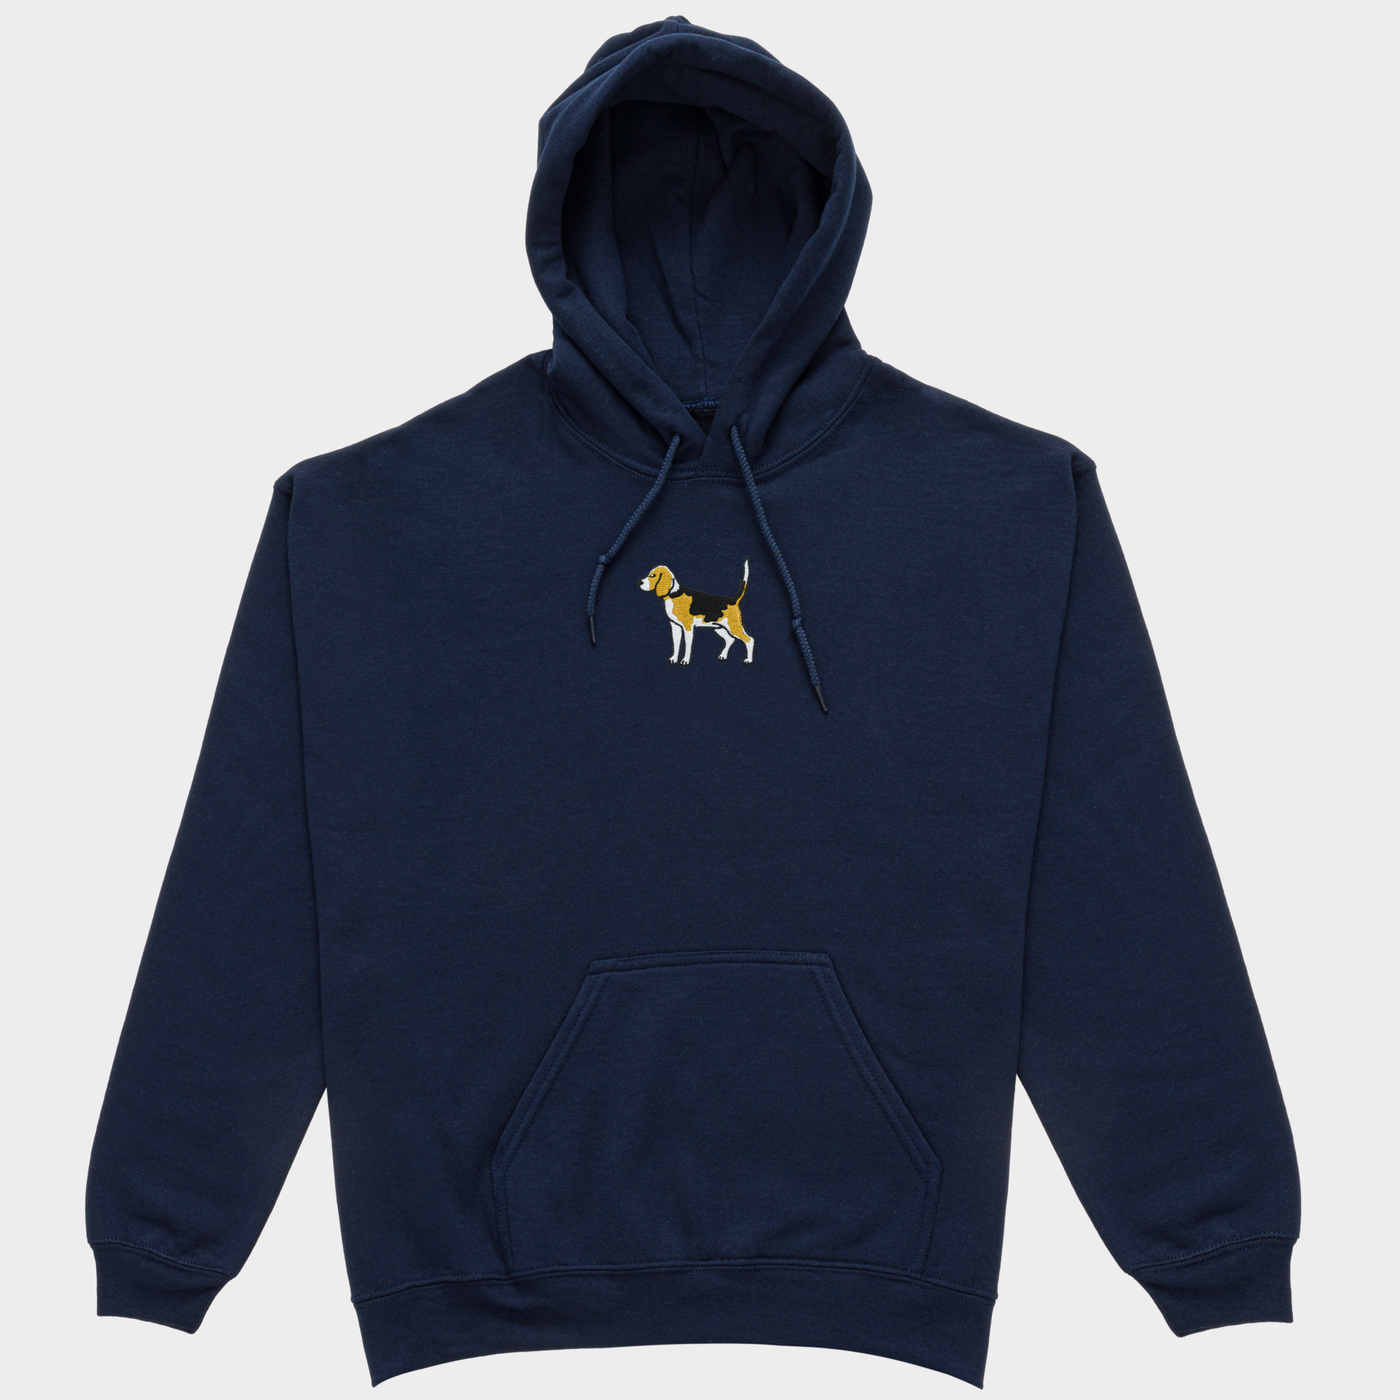 Bobby's Planet Men's Embroidered Beagle Hoodie from Paws Dog Cat Animals Collection in Navy Color#color_navy